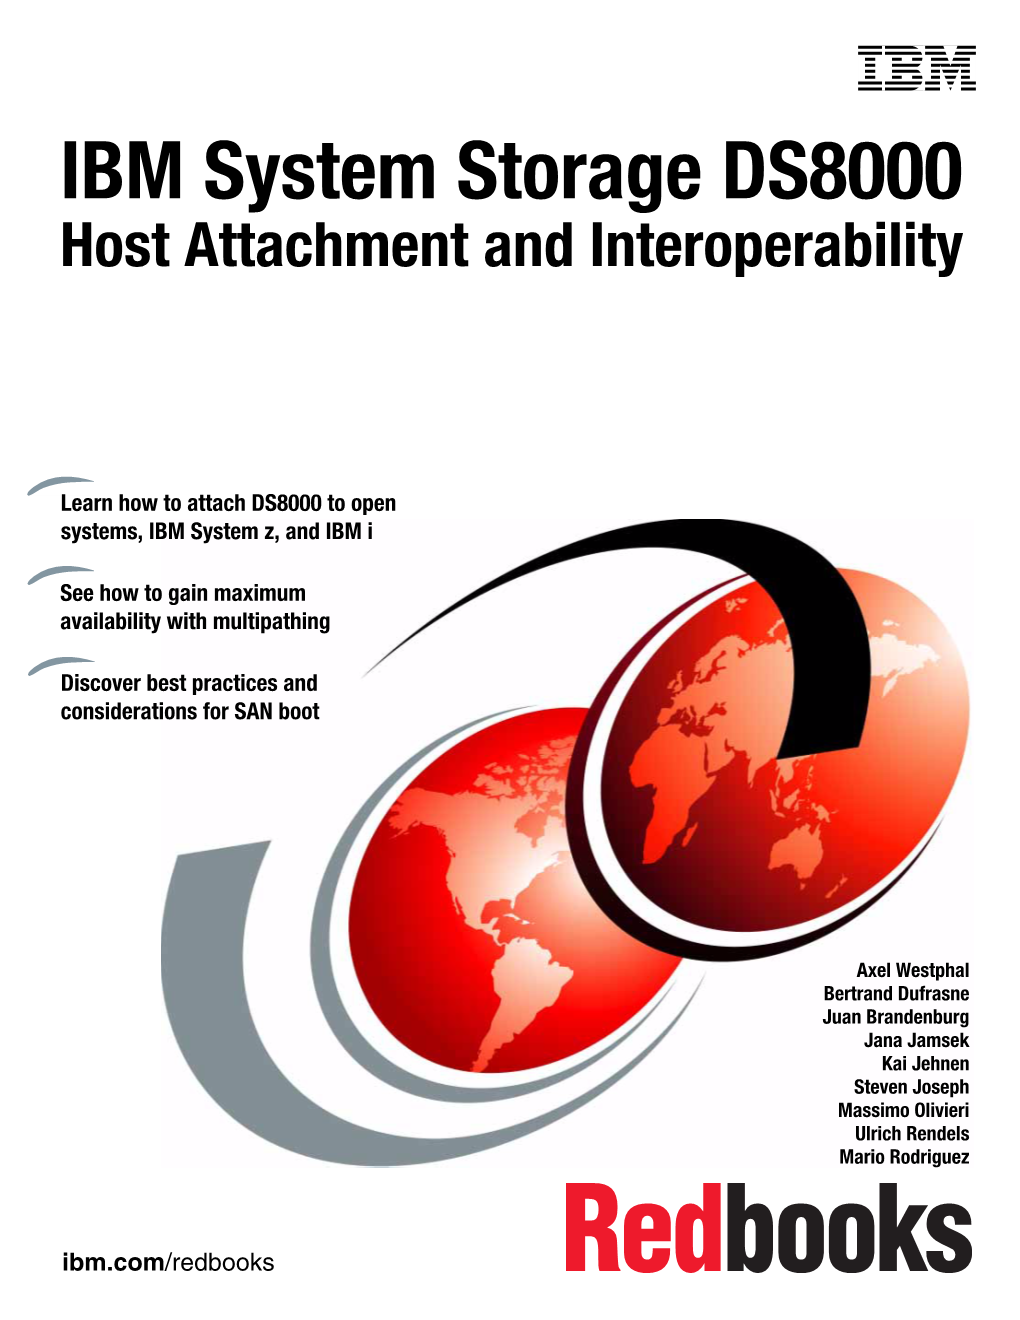 IBM System Storage DS8000 Host Attachment and Interoperability